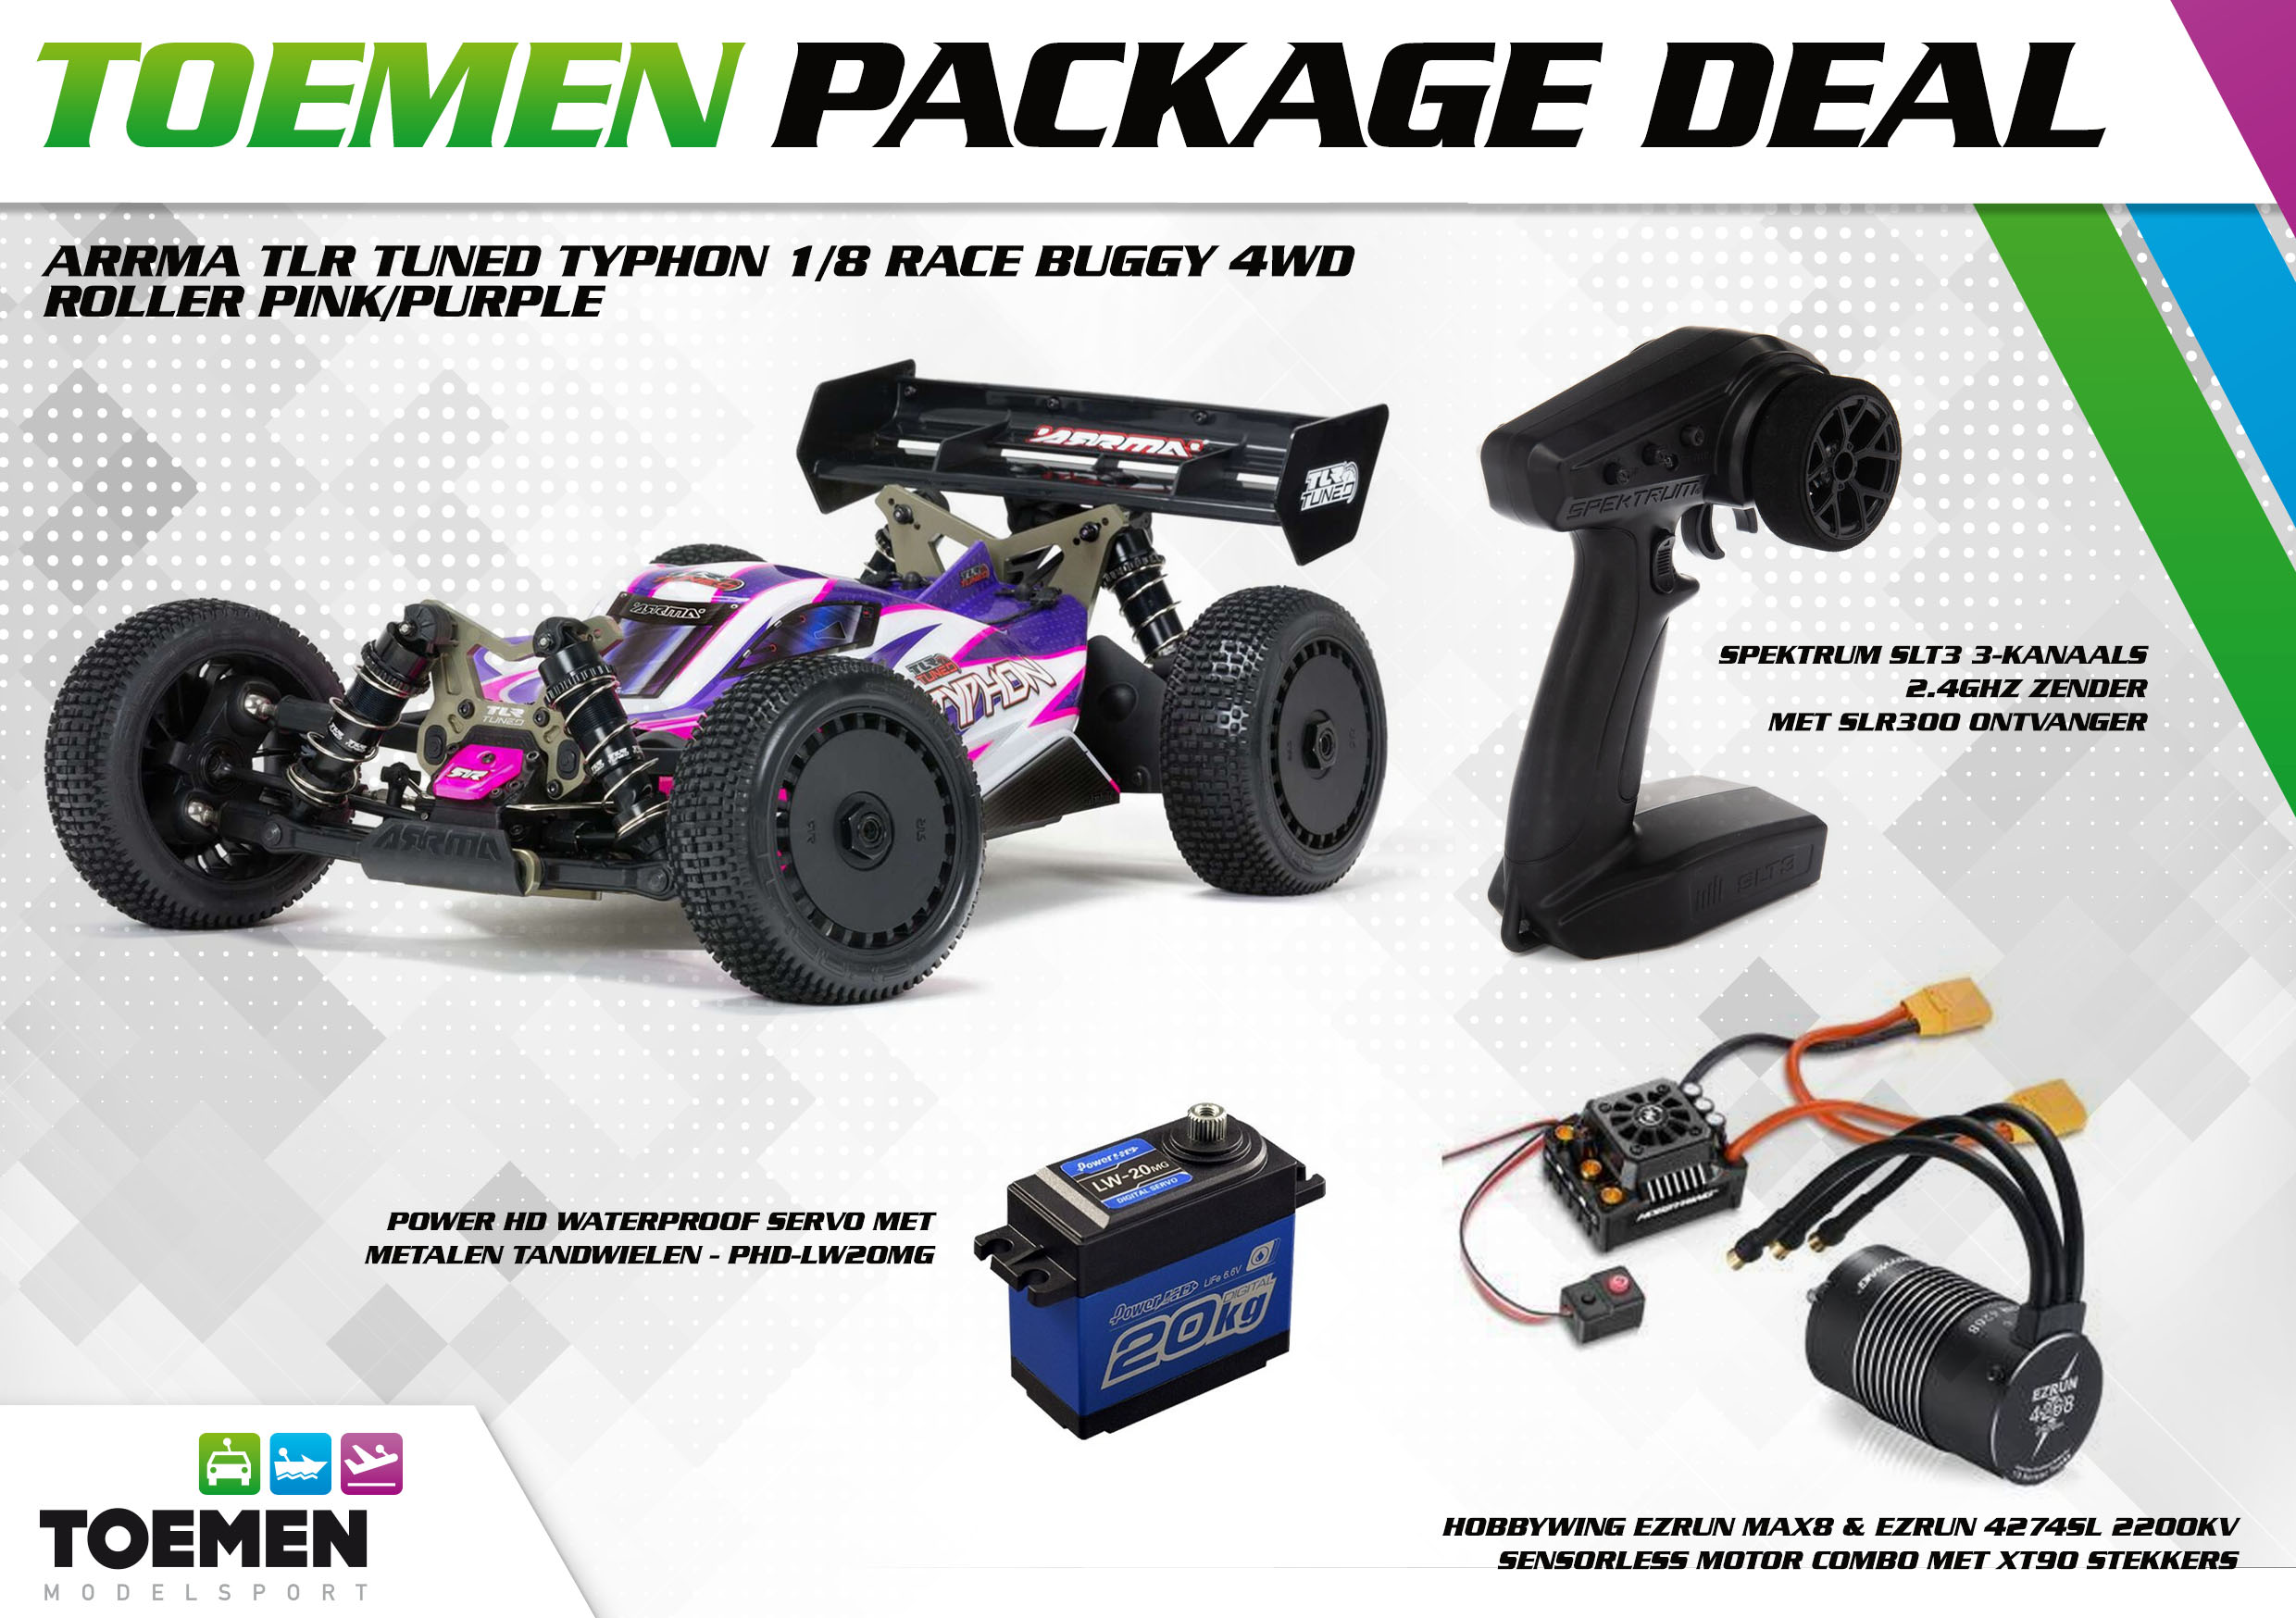 ARRMA TLR Tuned TYPHON 1/8 Race Buggy 4WD RTR Pink/Purple